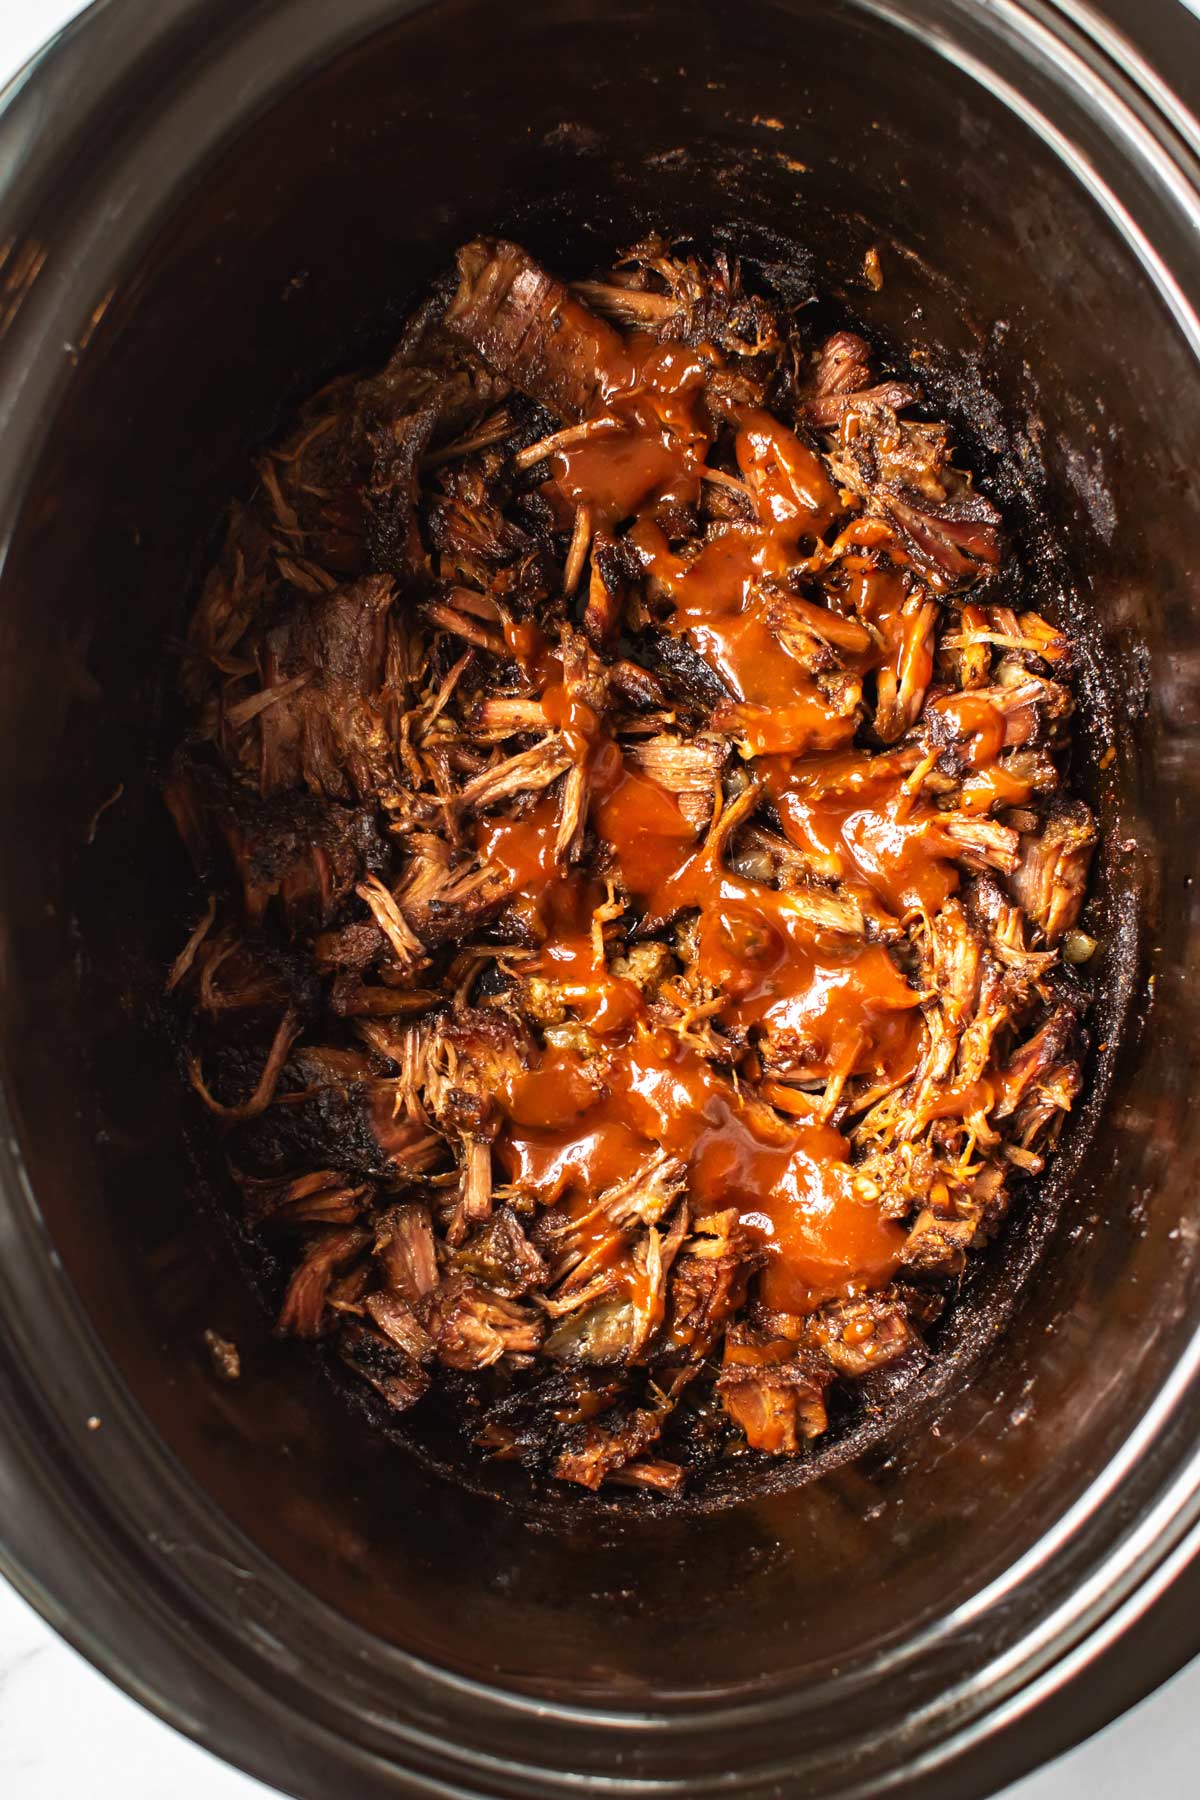 bbq sauce poured over the shredded beef.